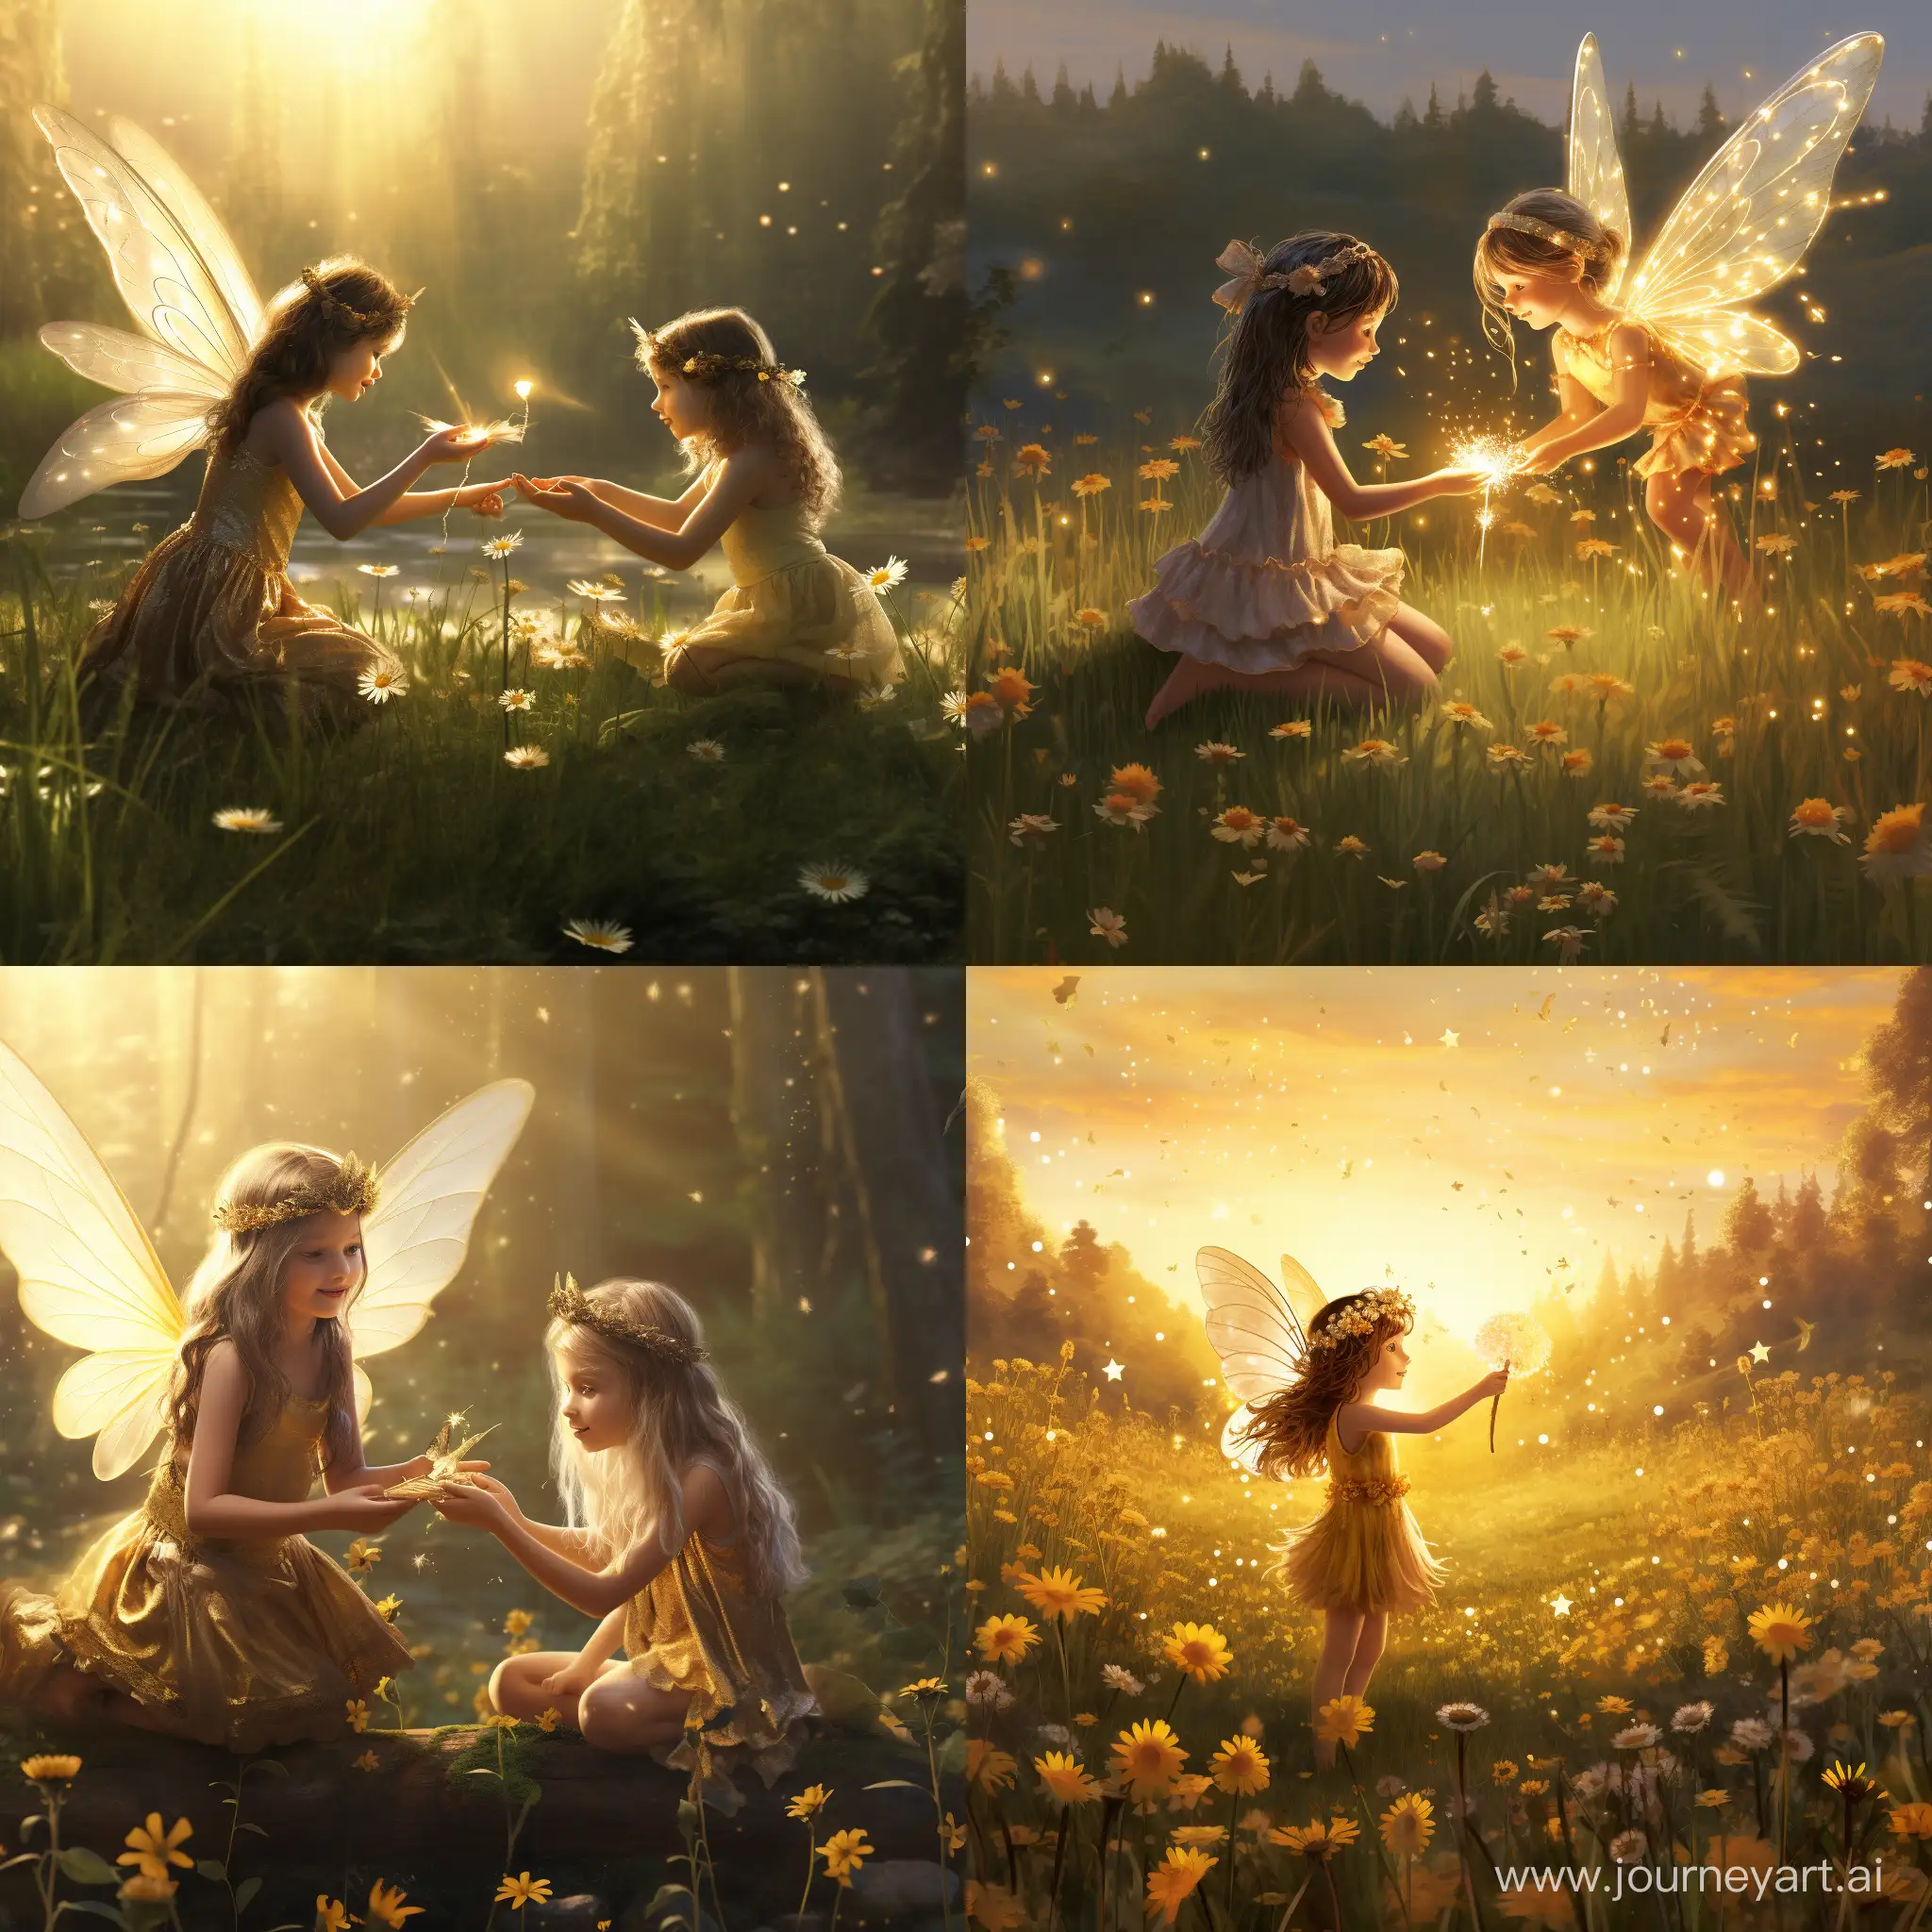 Illustration: A whimsical scene of Sparkle, the little fairy, receiving a golden invitation in the sunny Enchanted Meadow.